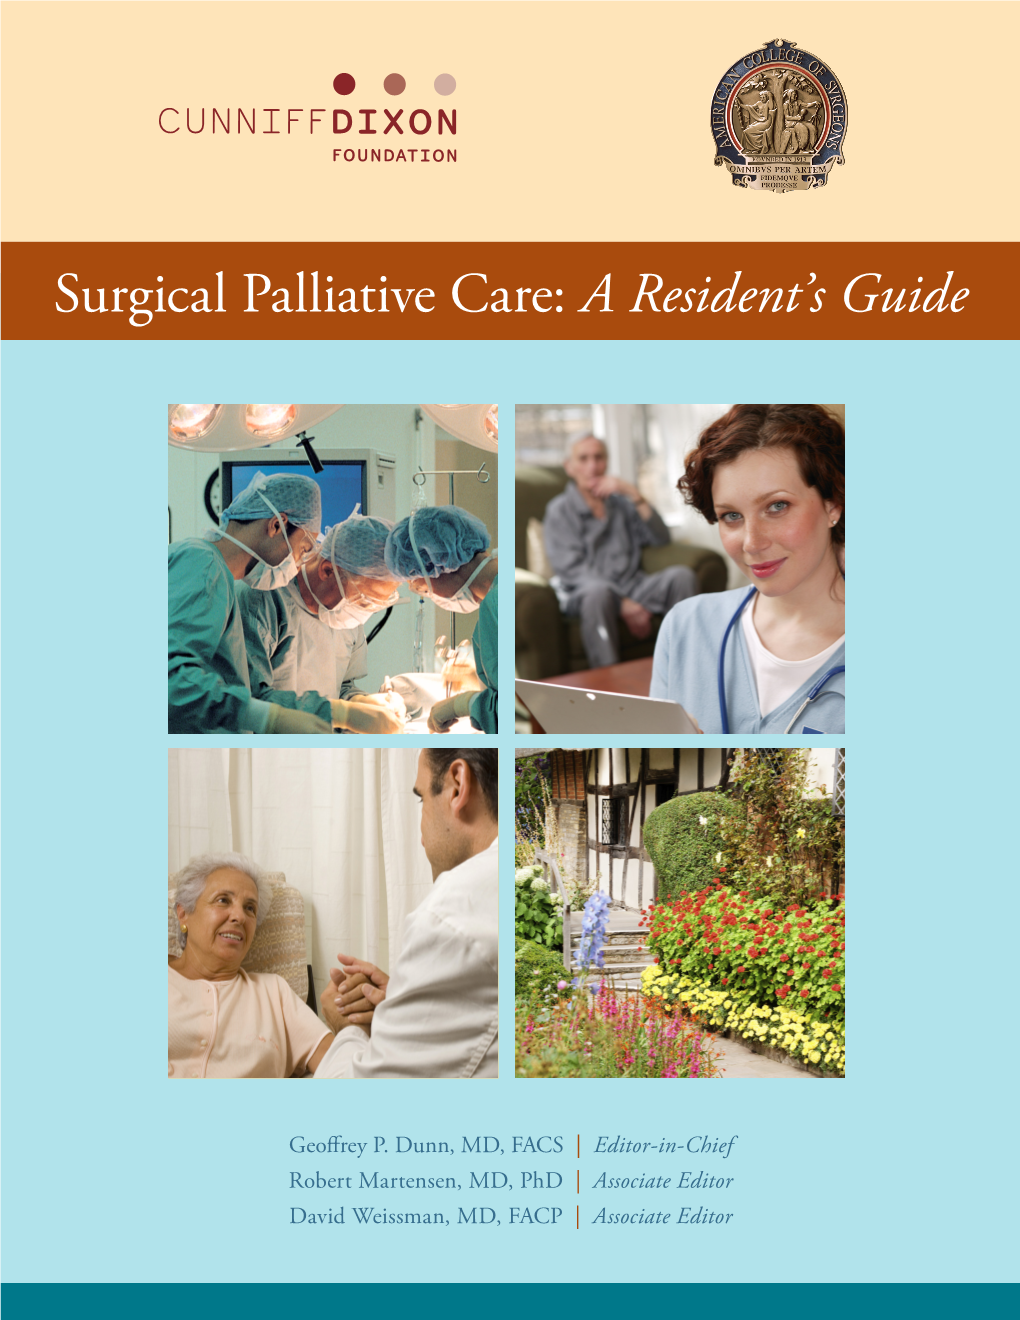 Surgical Palliative Care: a Resident's Guide